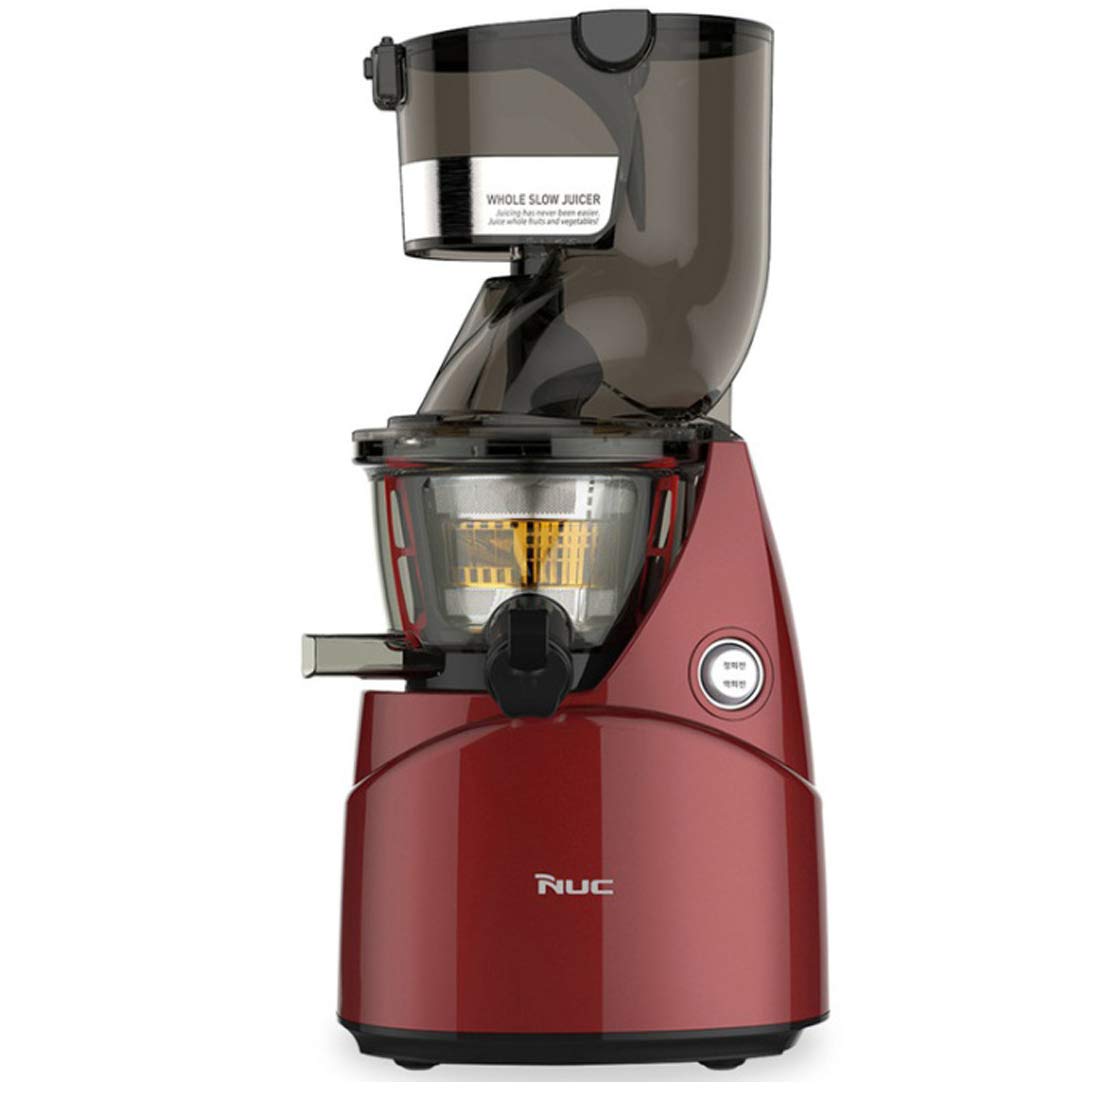 Kuvings Releases Commercial Auto & Vacuum Blender and new Whole Slow Juicer  to Expand into Global Home Appliances Market